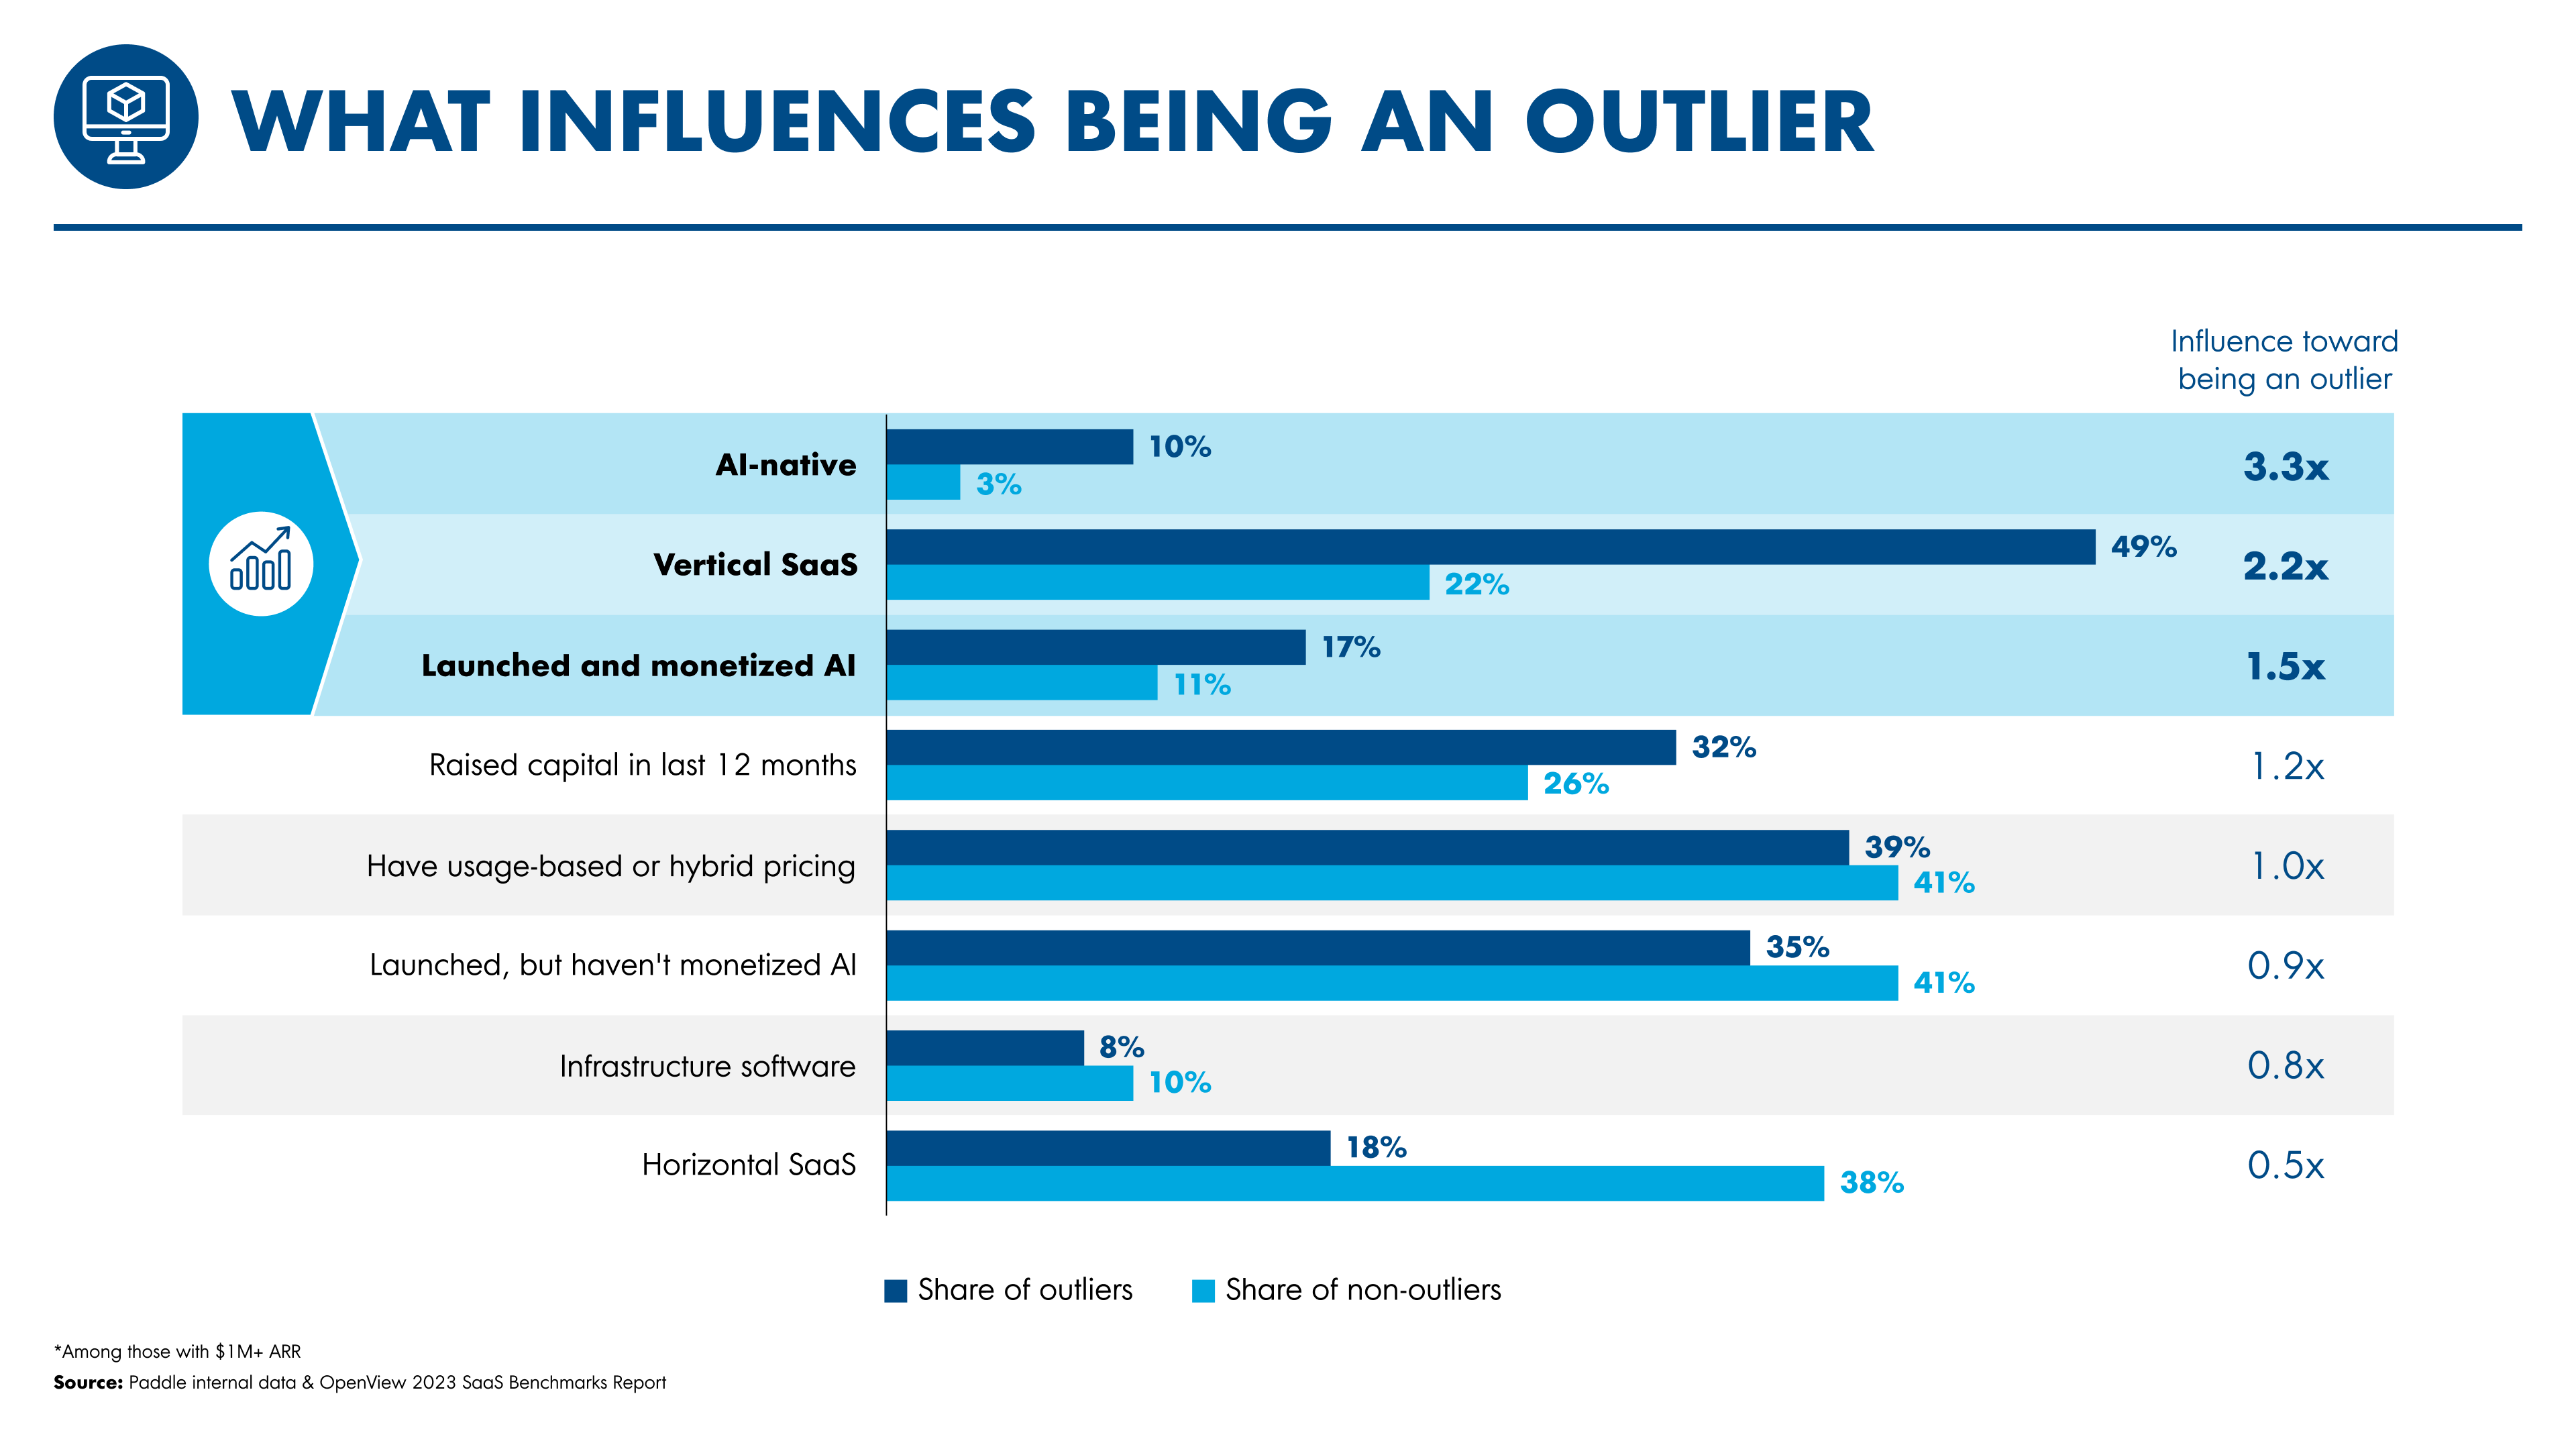 What influences being an outlier